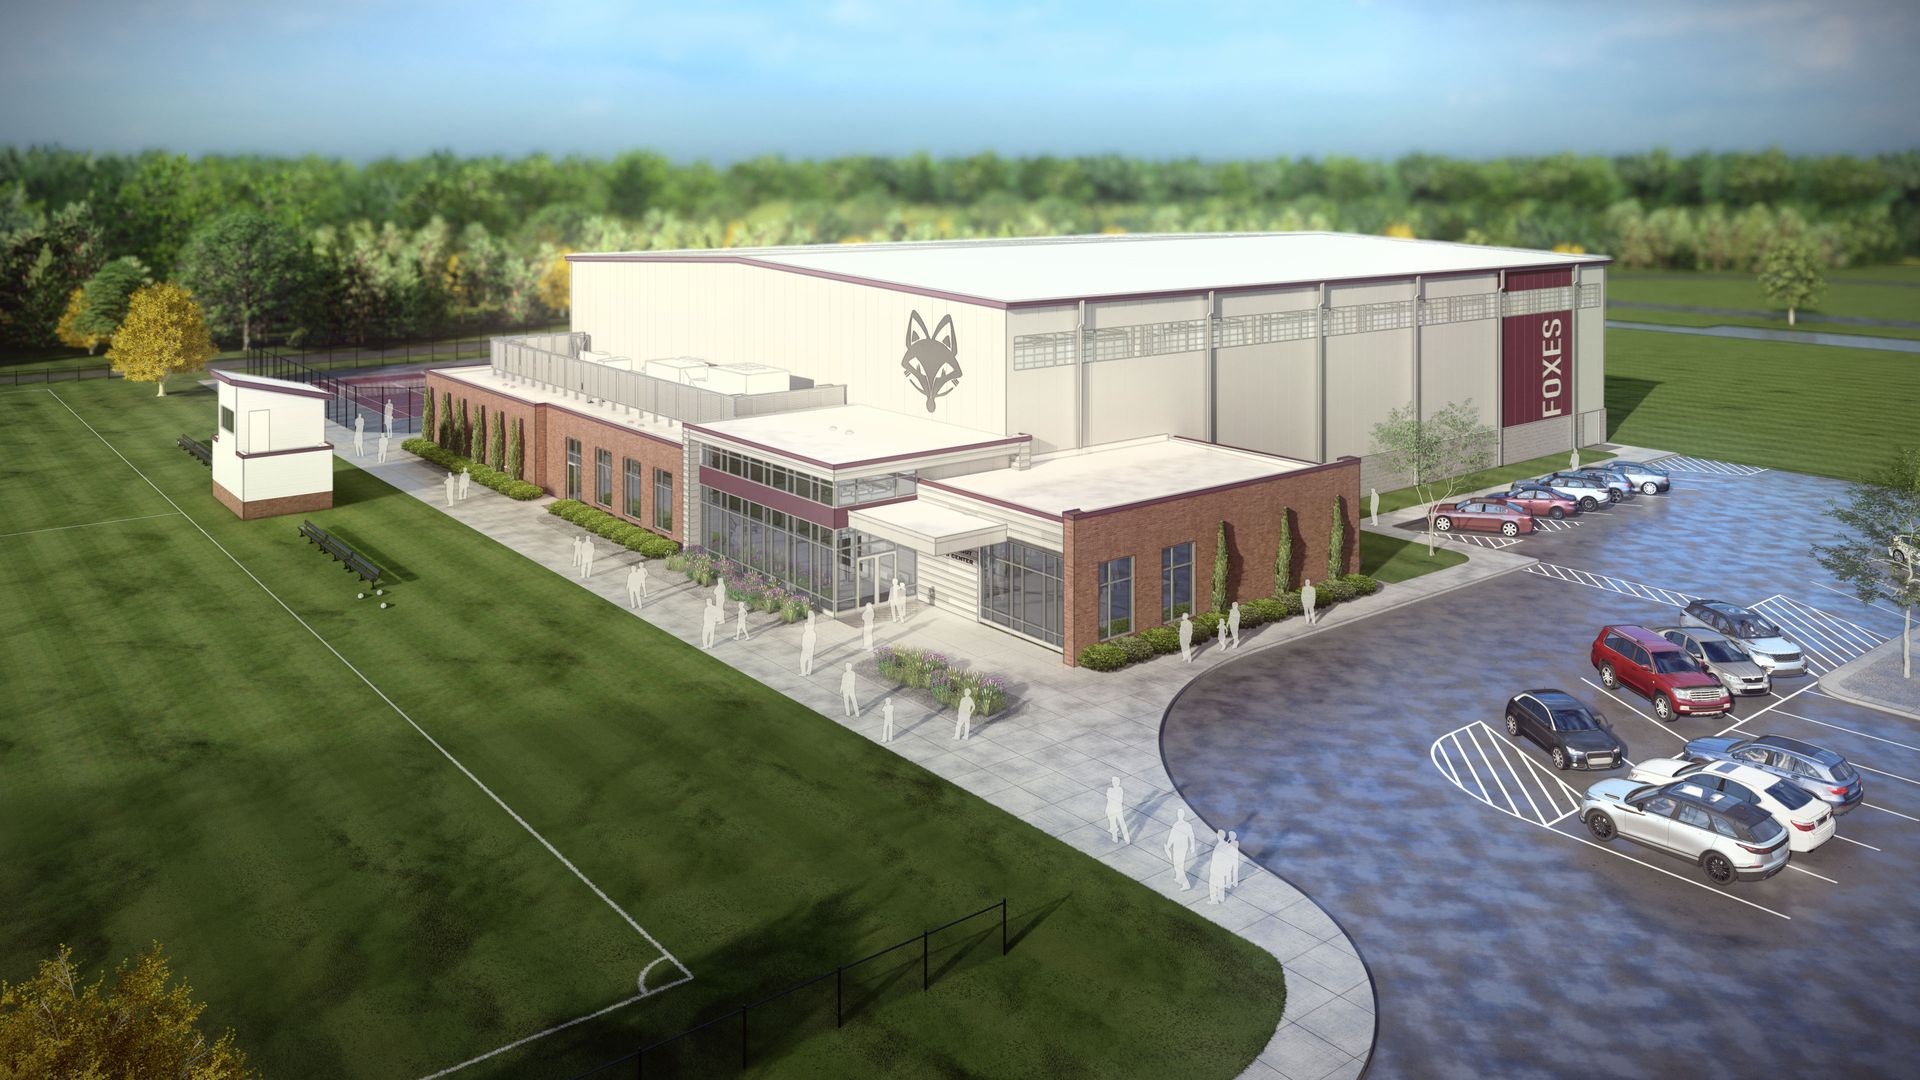 Rendering of the outside of the Timothy Trout Sports Center